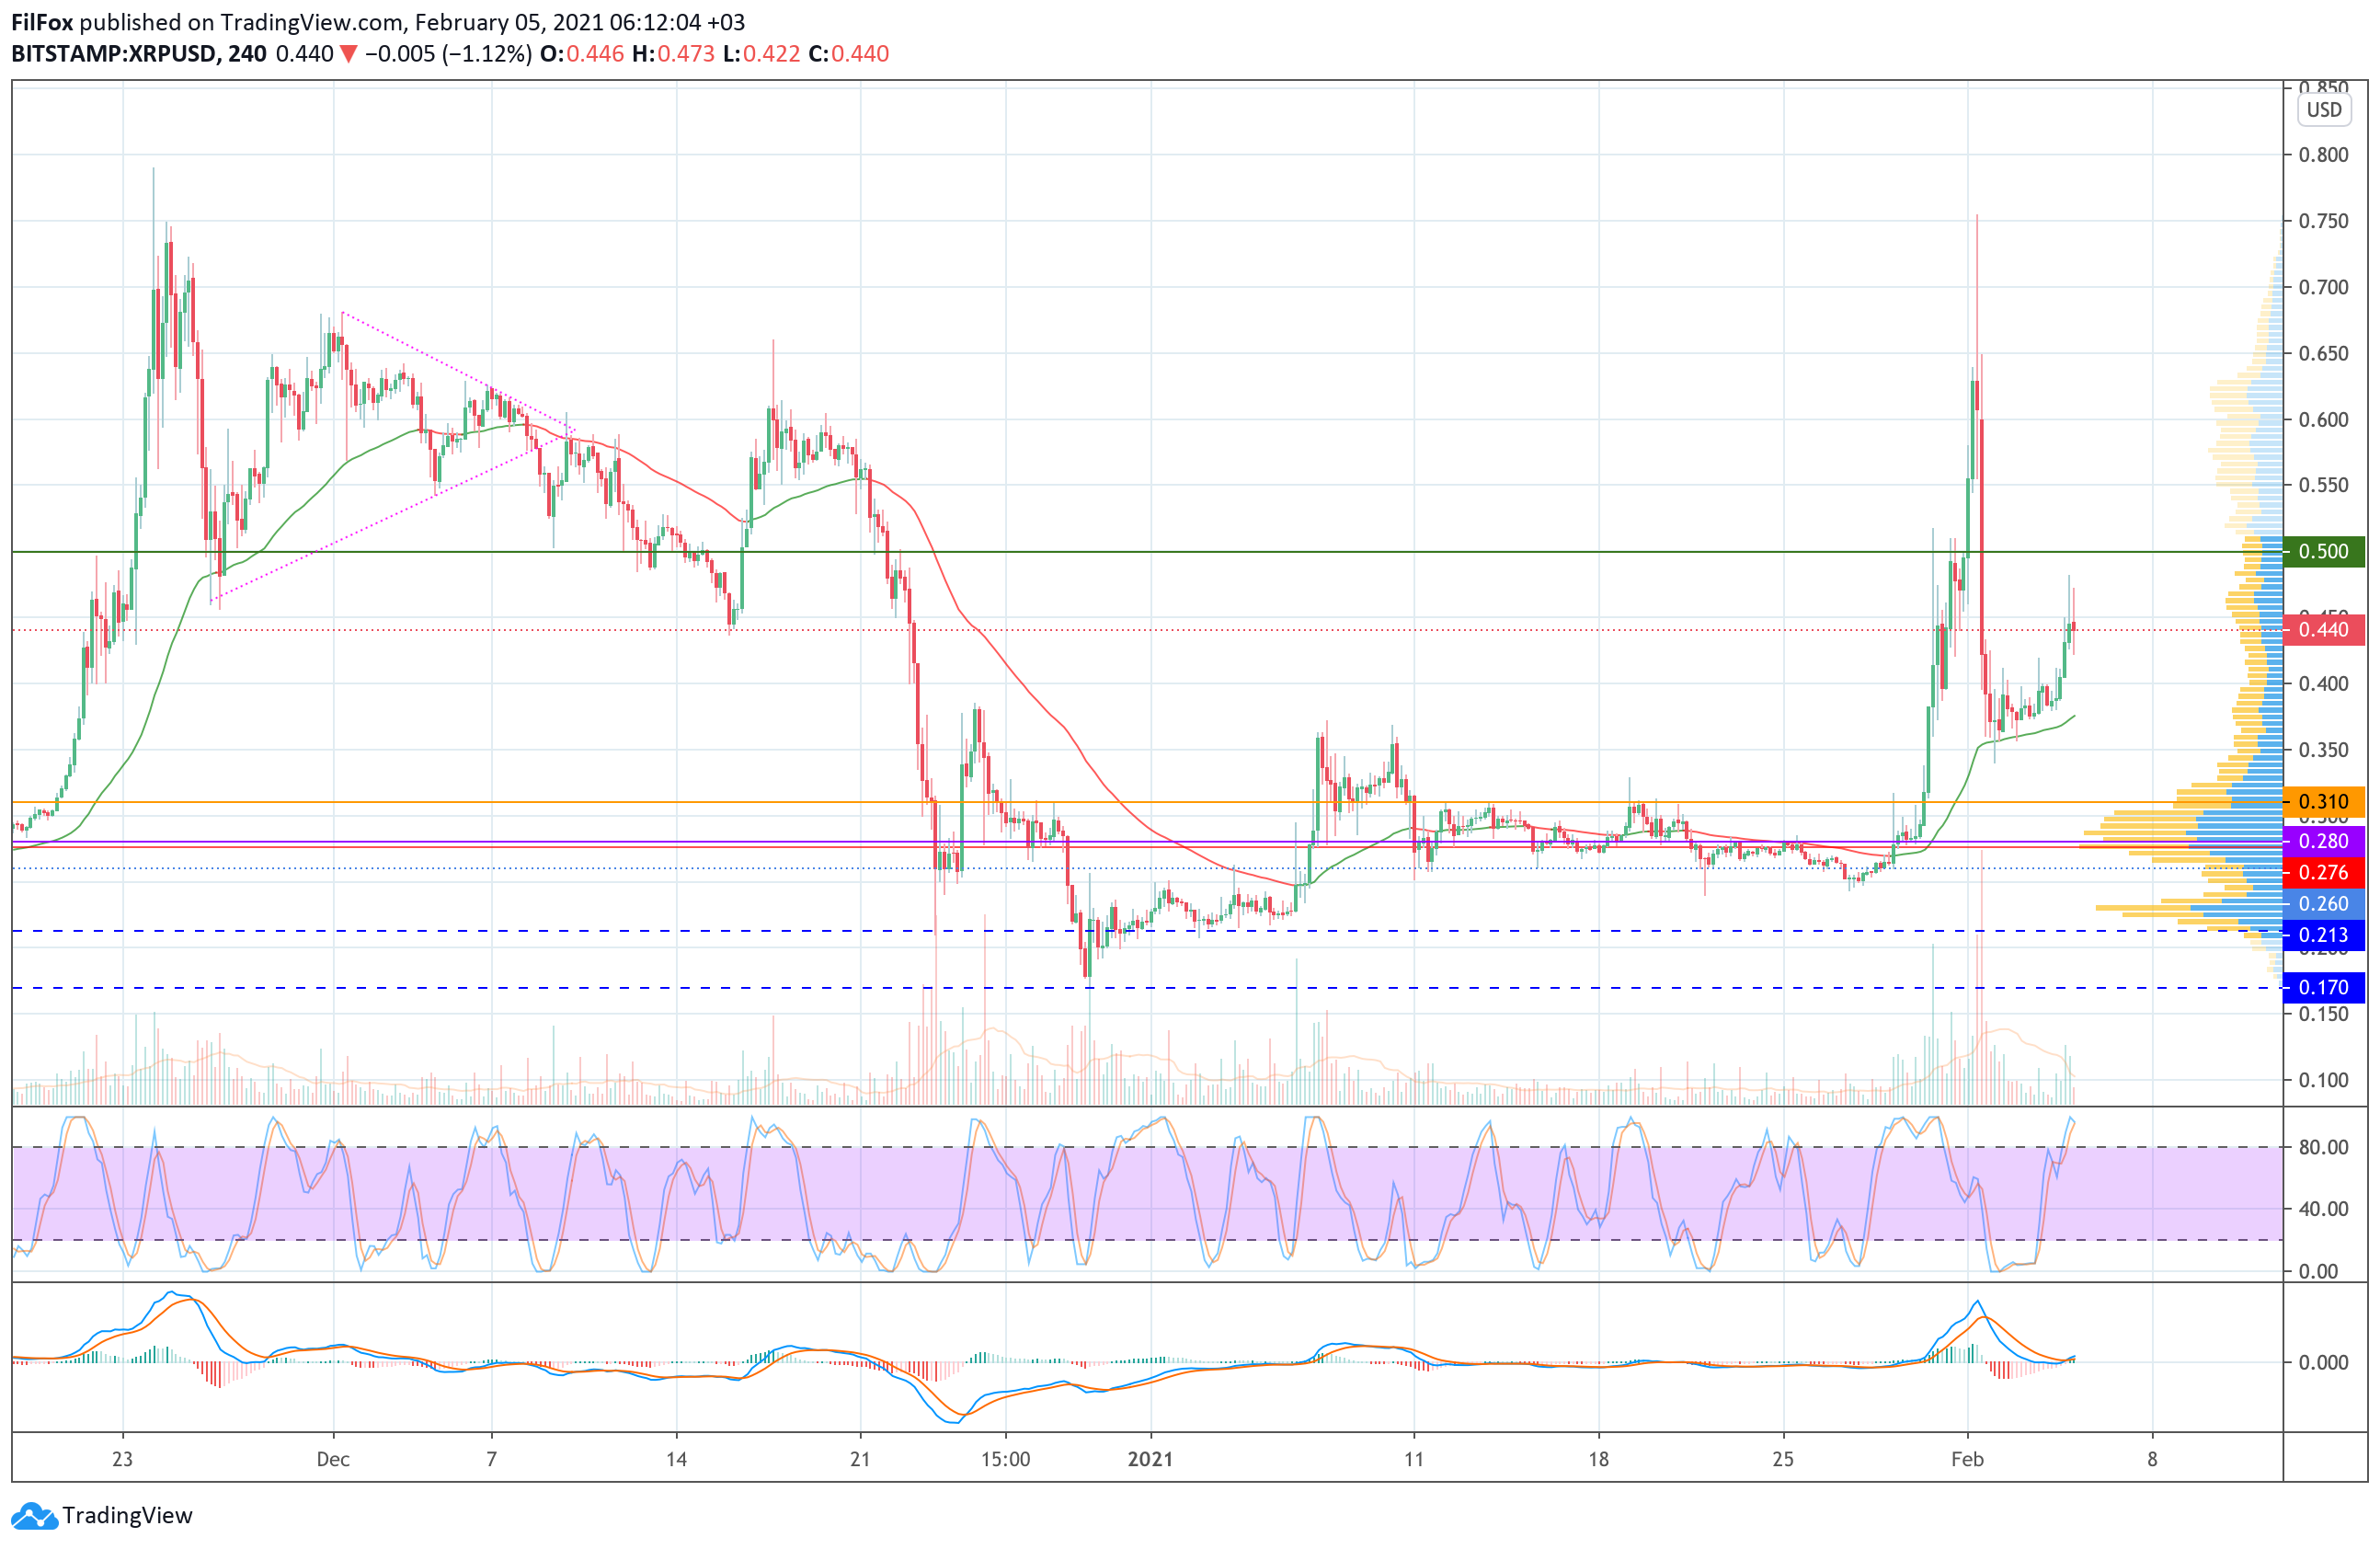 Analysis of prices for Bitcoin, Ethereum, Ripple for 02/05/2021